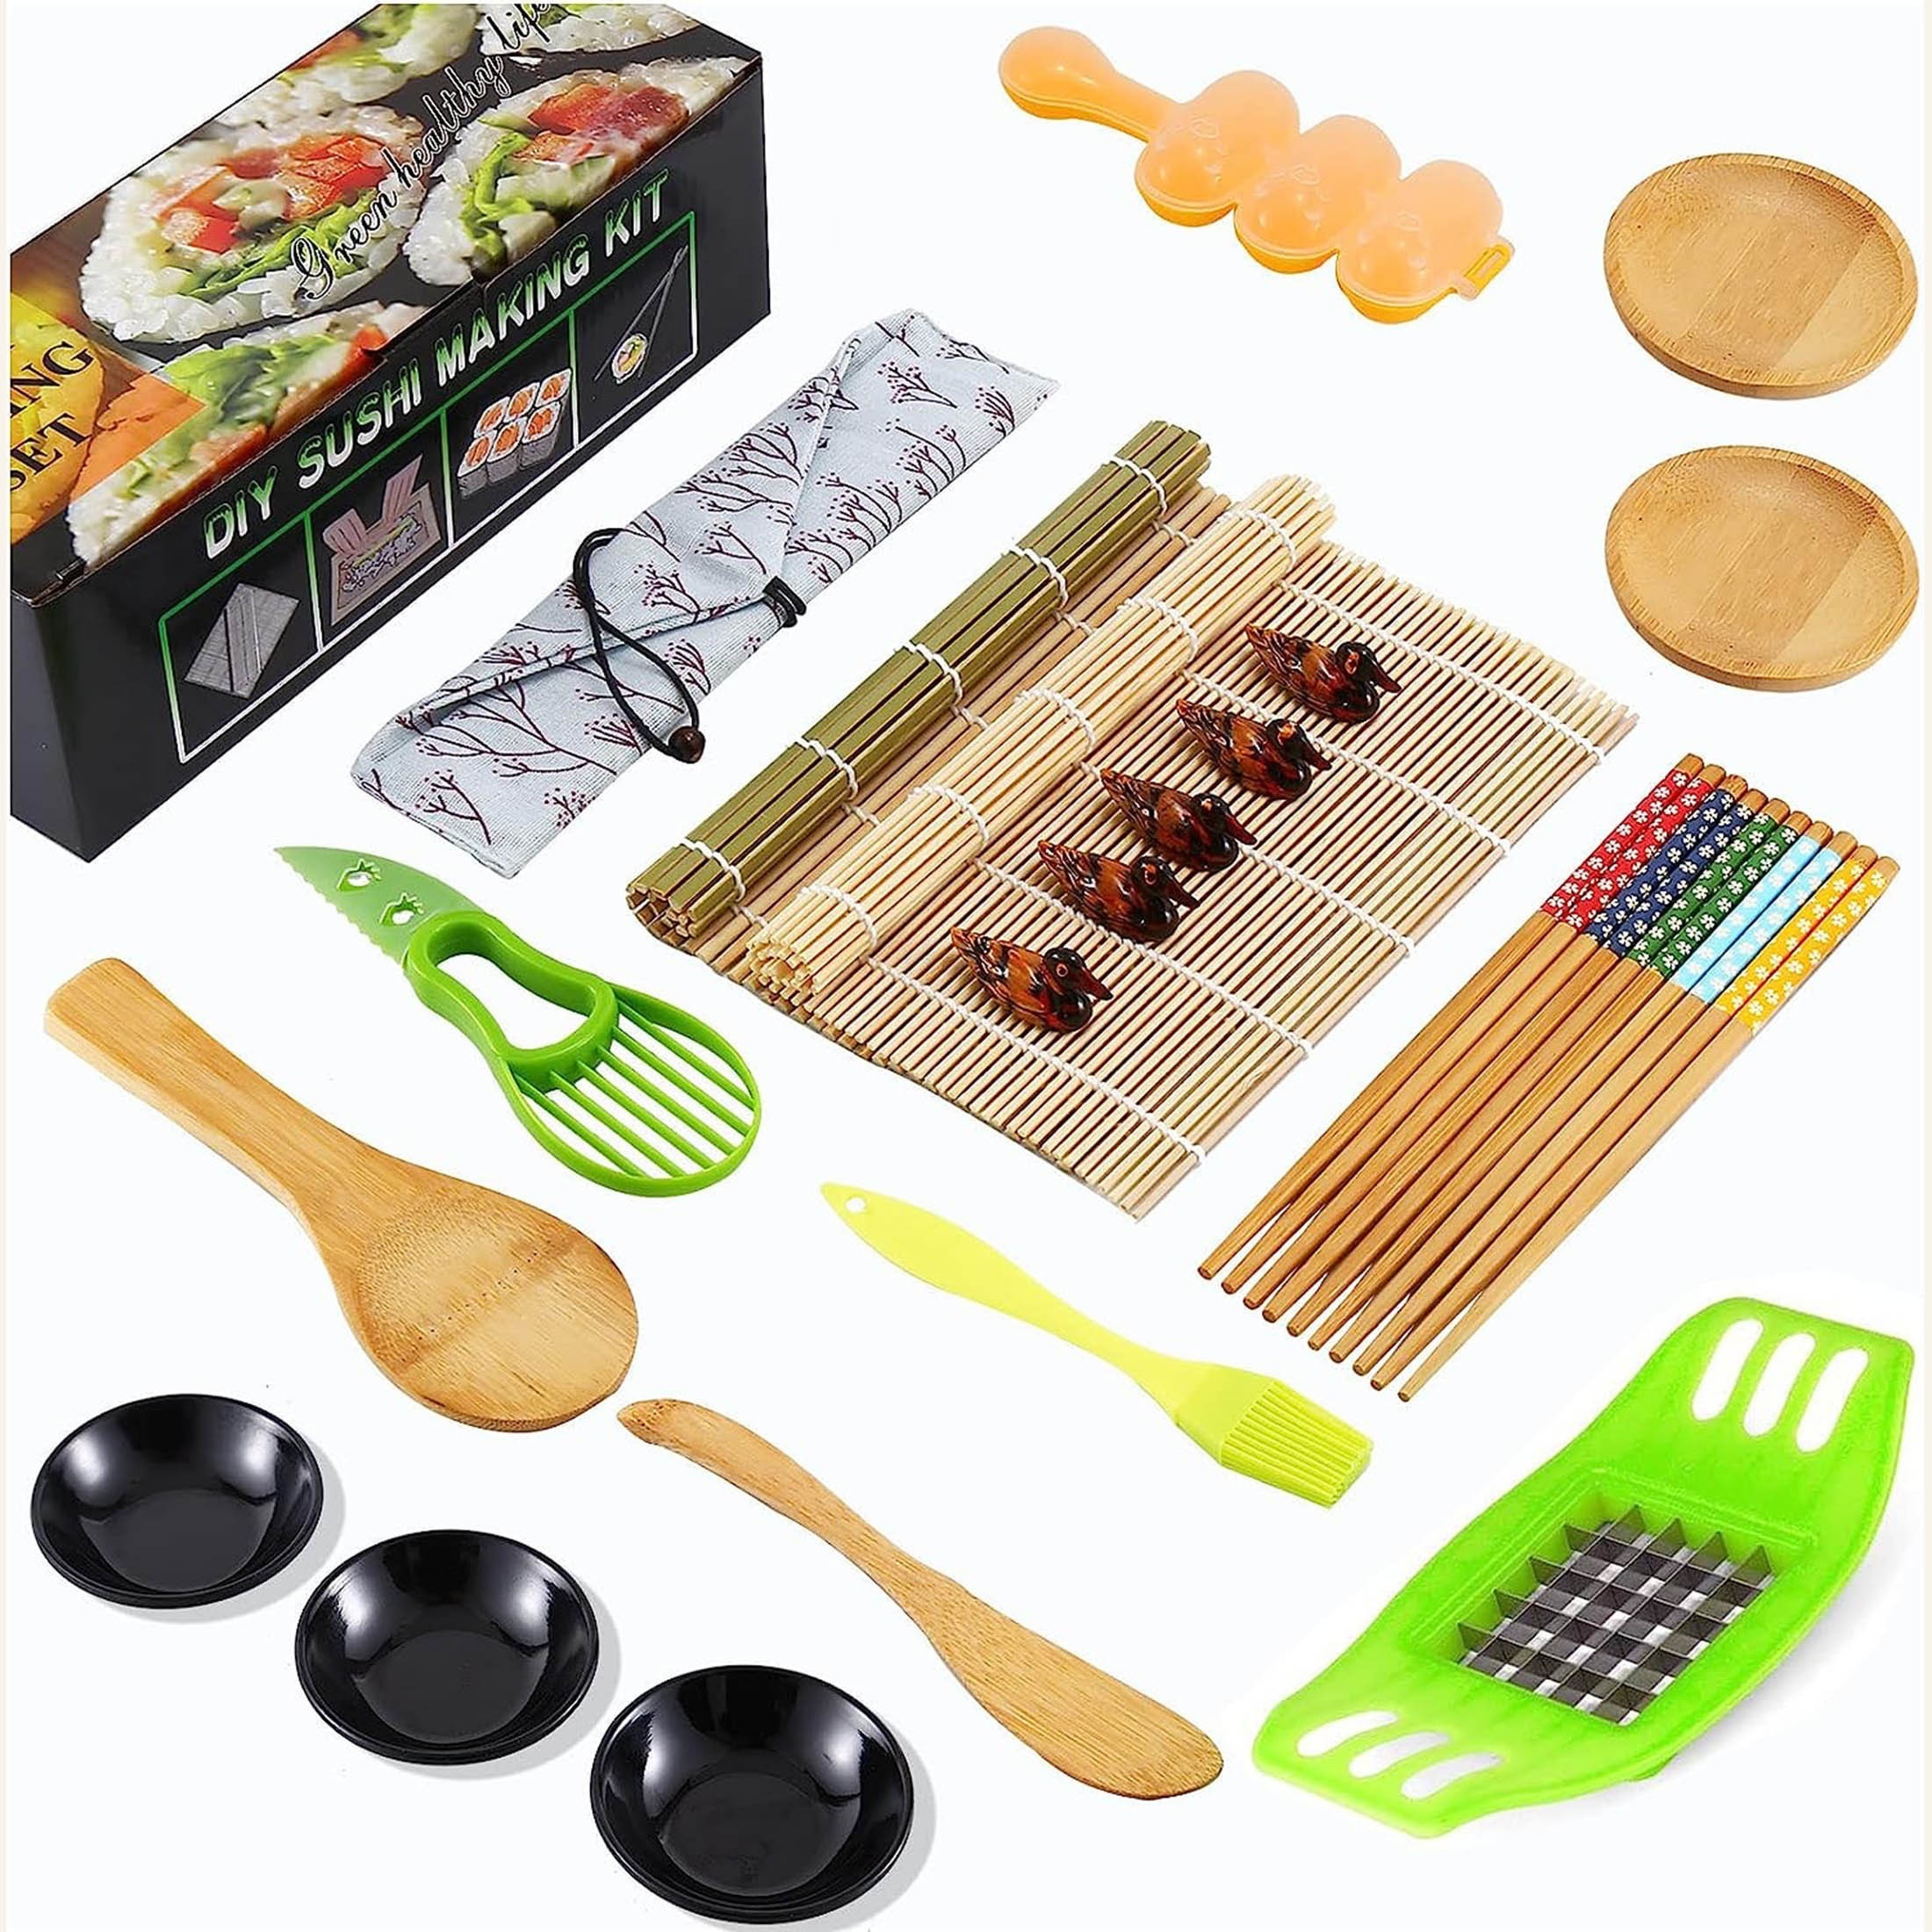 Bamboo Sushi Making Kit - Cooking Gifts Complete Set with Maki